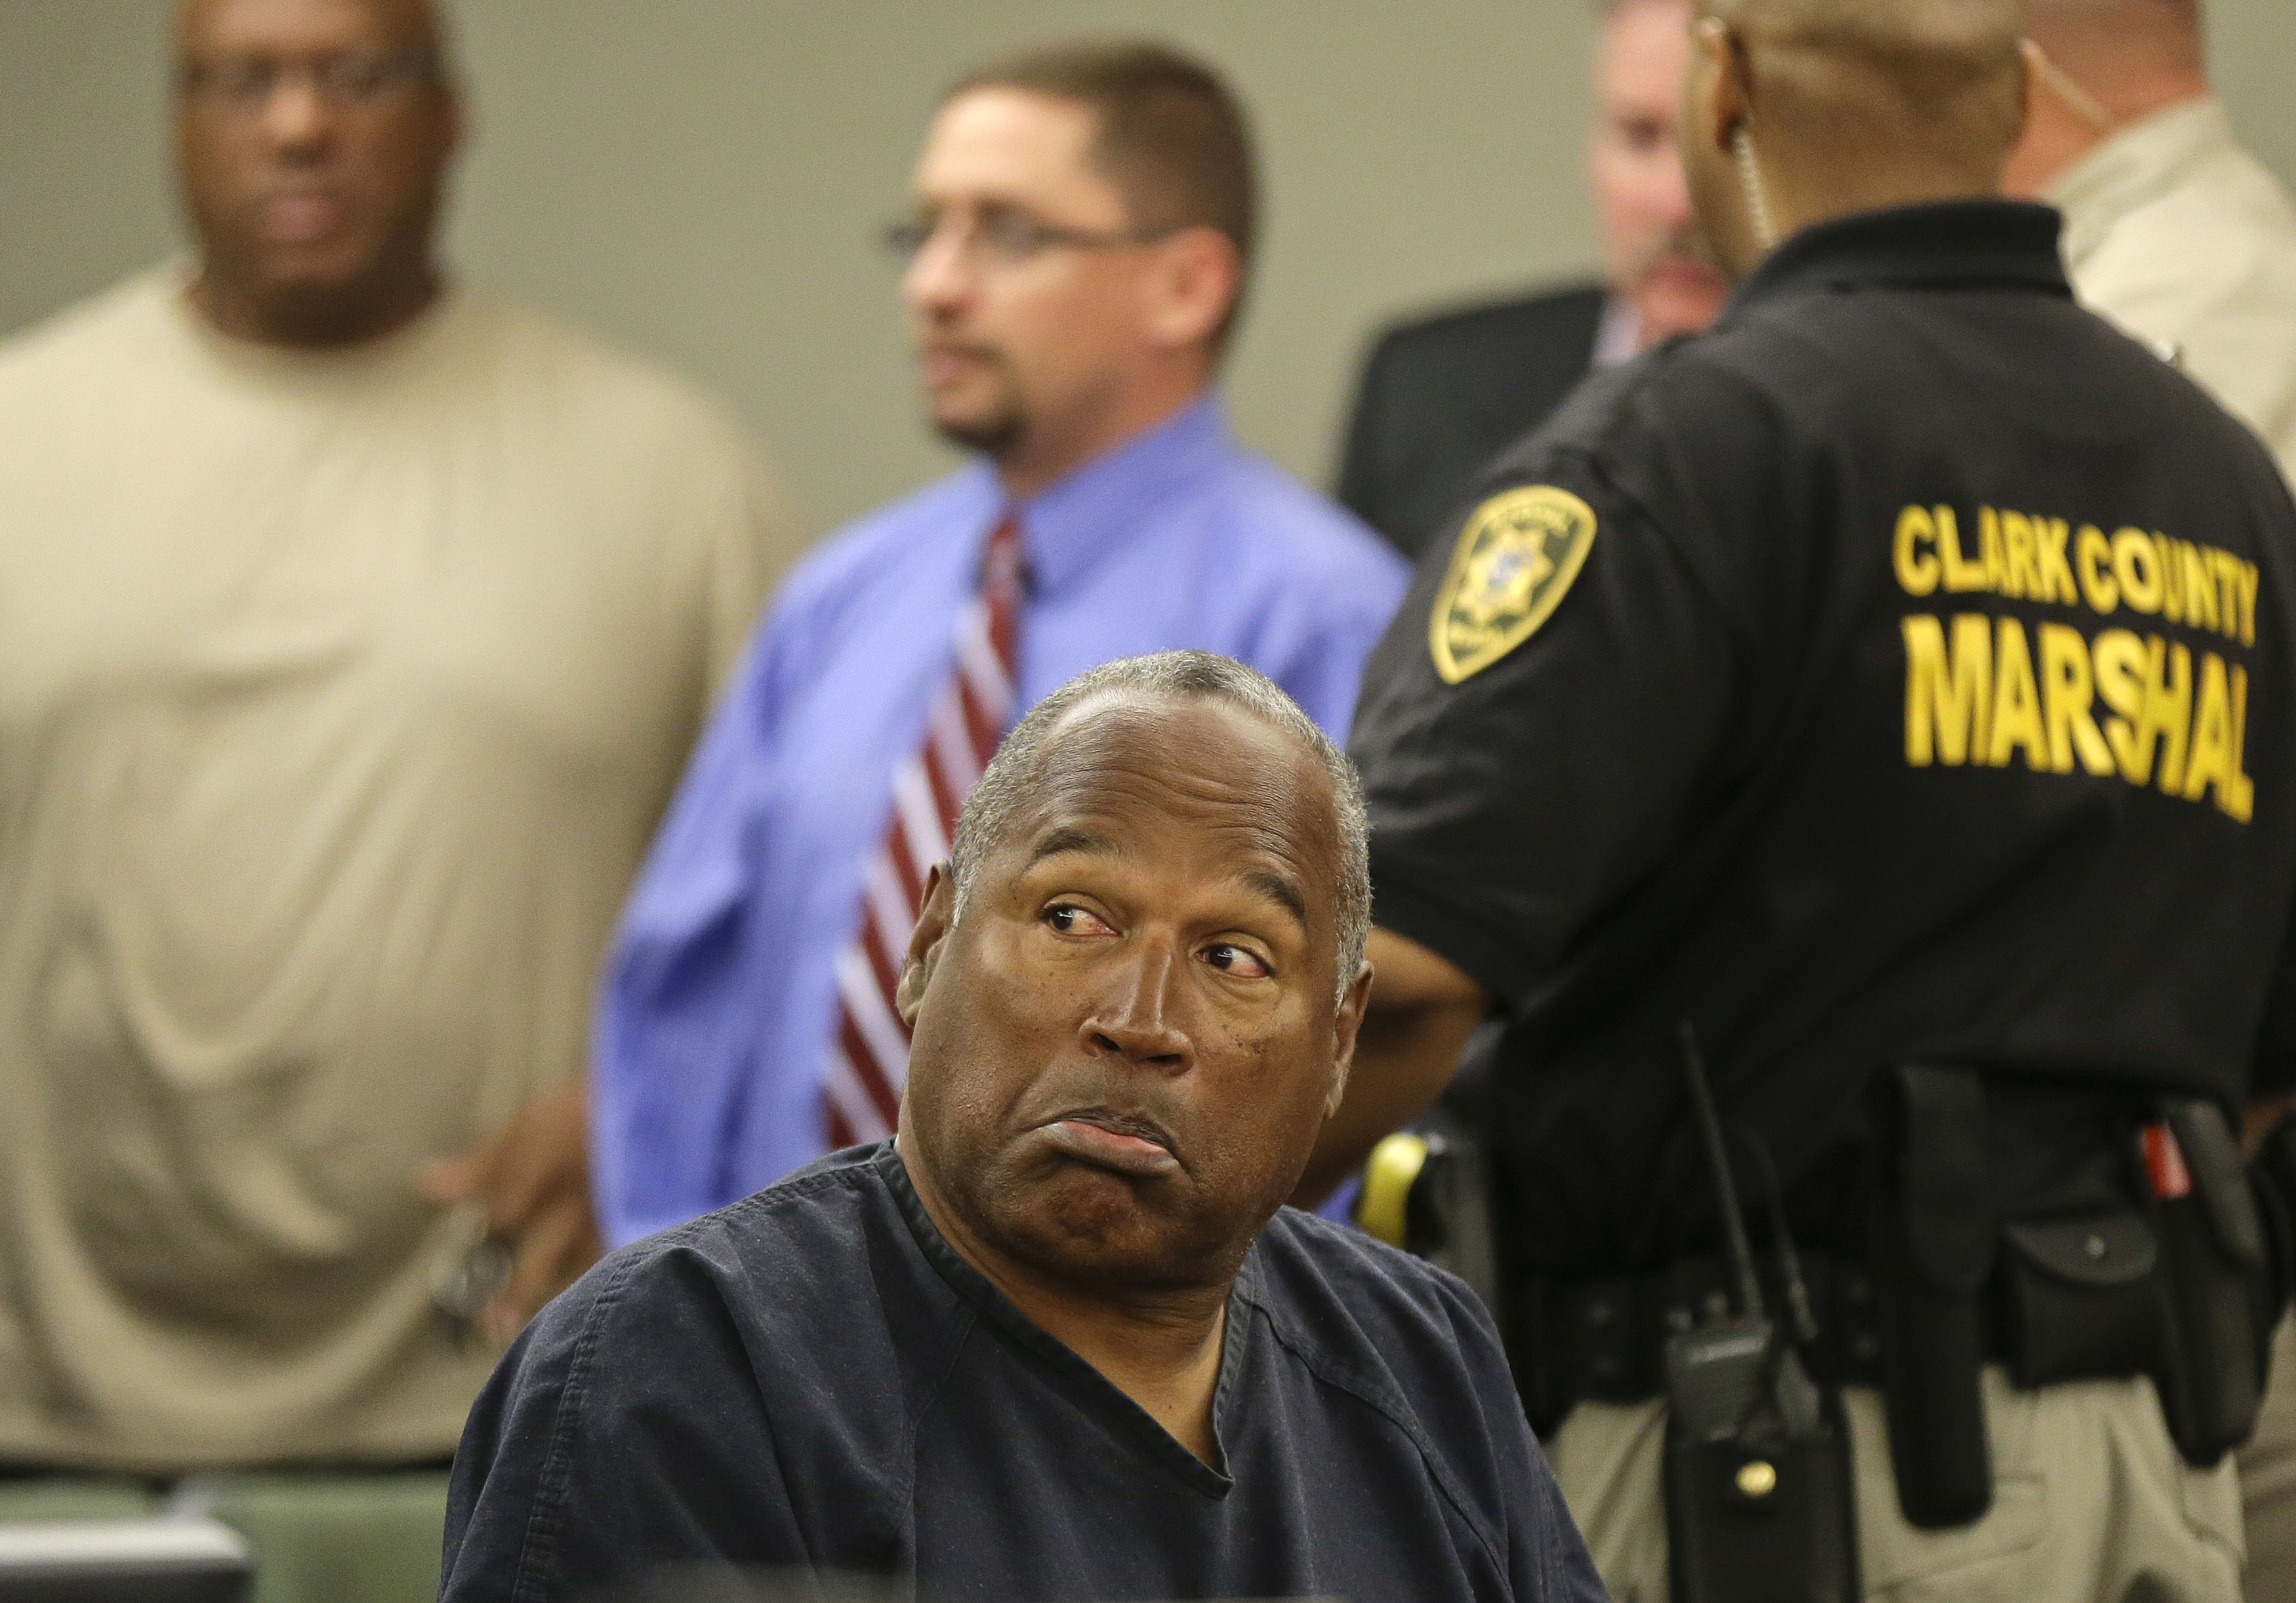  O.J. Simpson reacts after speaking to his attorneys in Clark County District Court in Las Vegas, Nevada